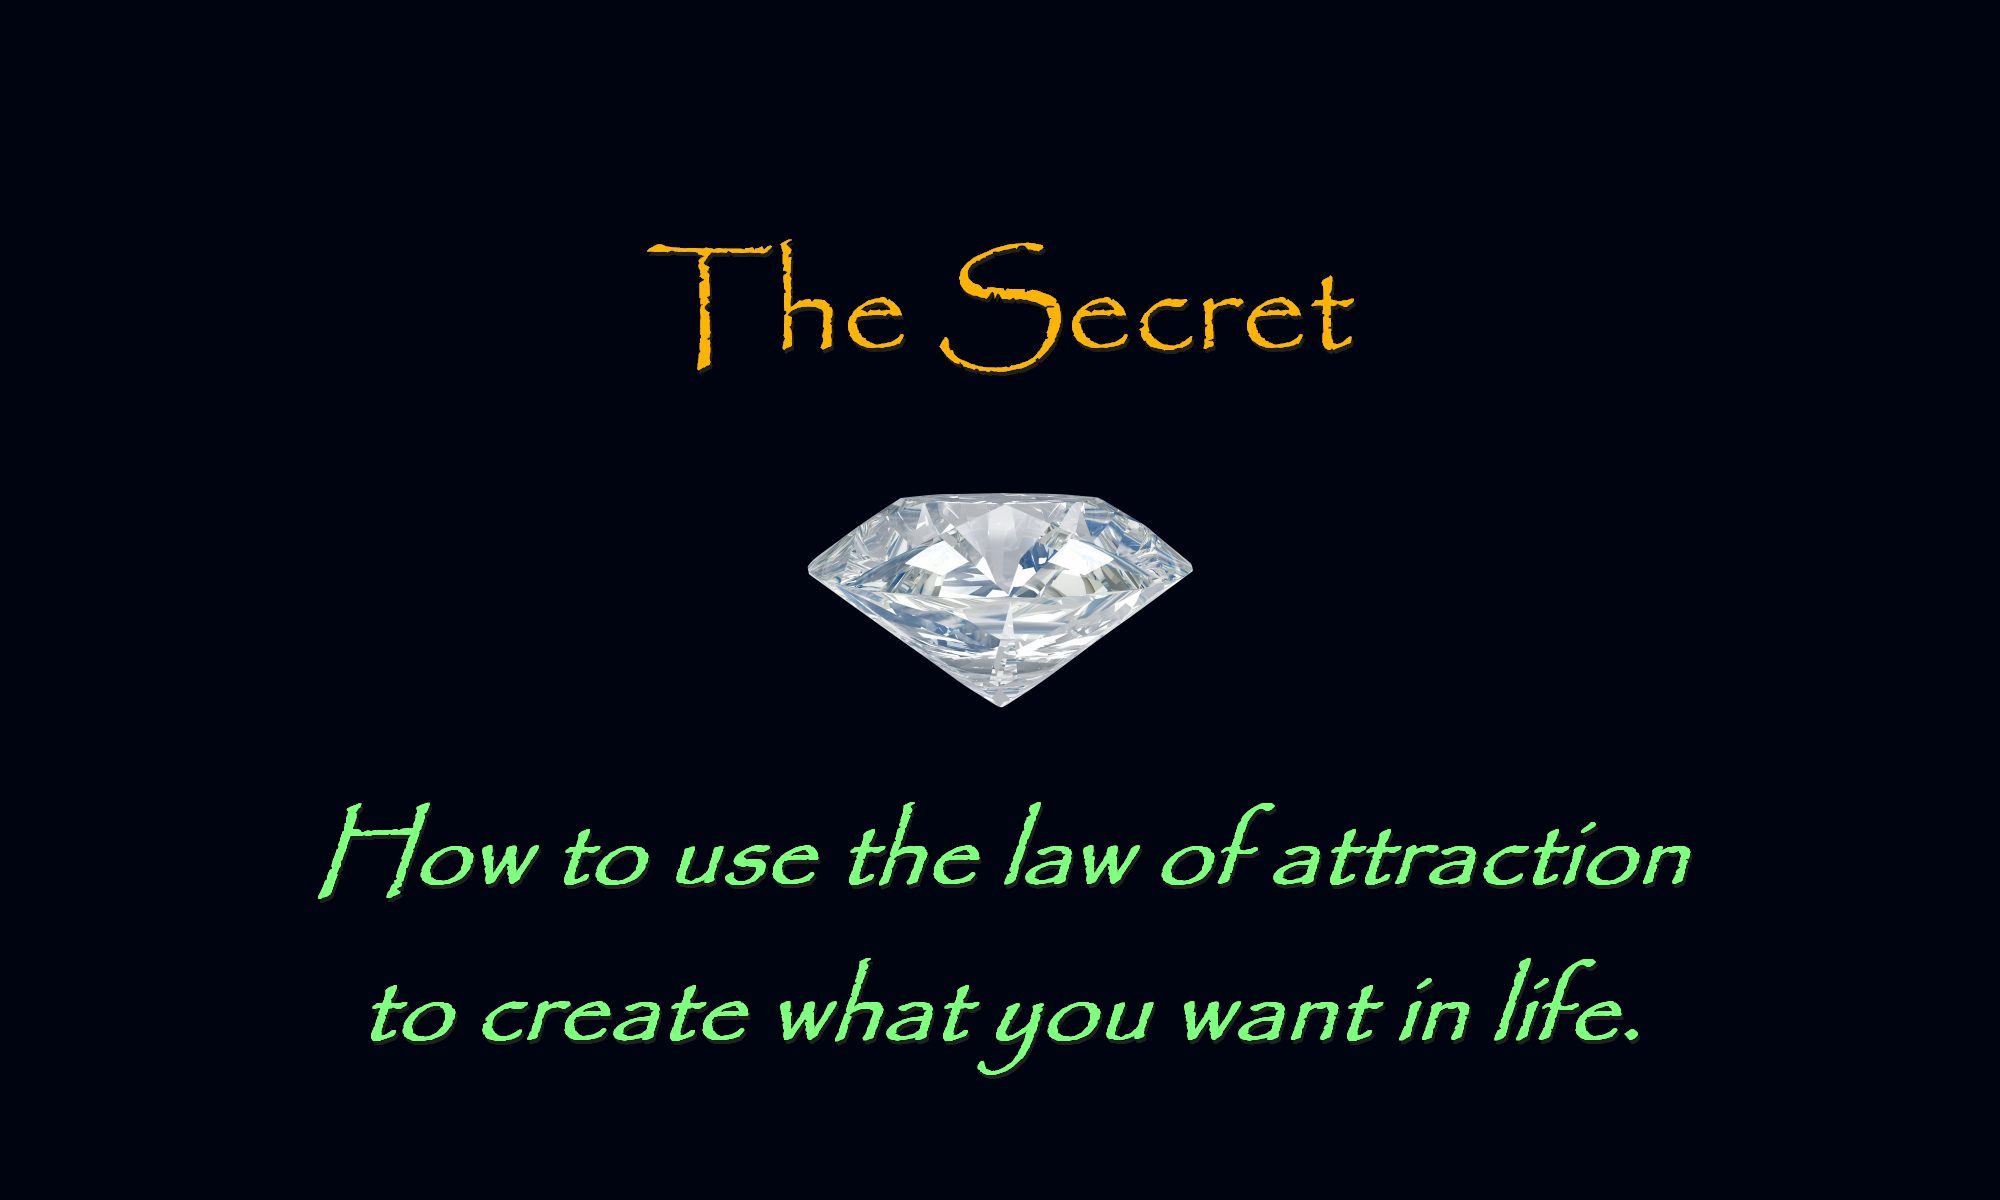 The secret on how to use the law of attraction to create what you want in life and manifest goals with affirmations